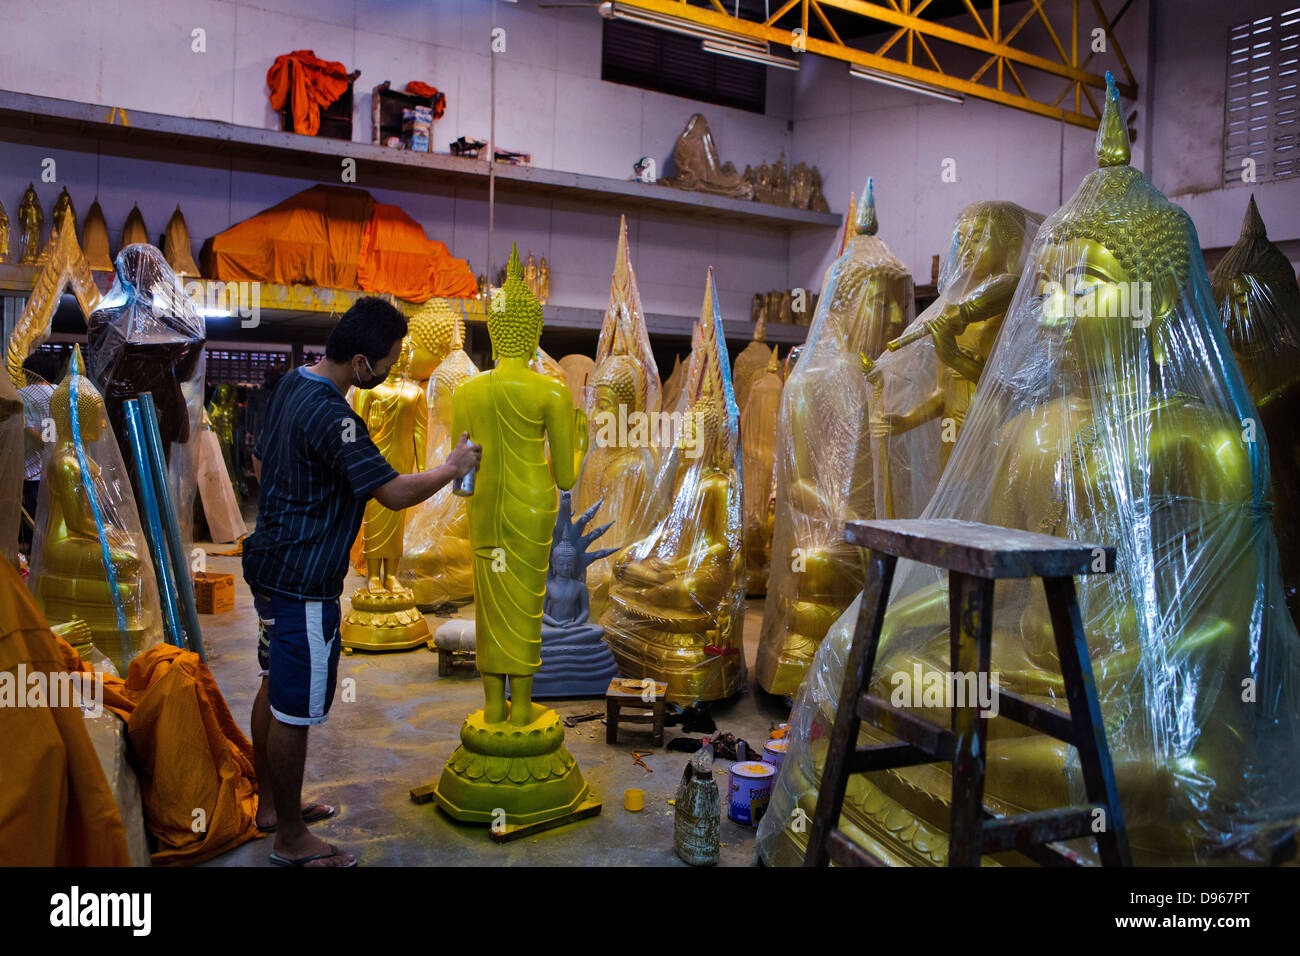 Workshop with man spraying Buddhist figures and statues, Bangkok, Thailand Stock Photo